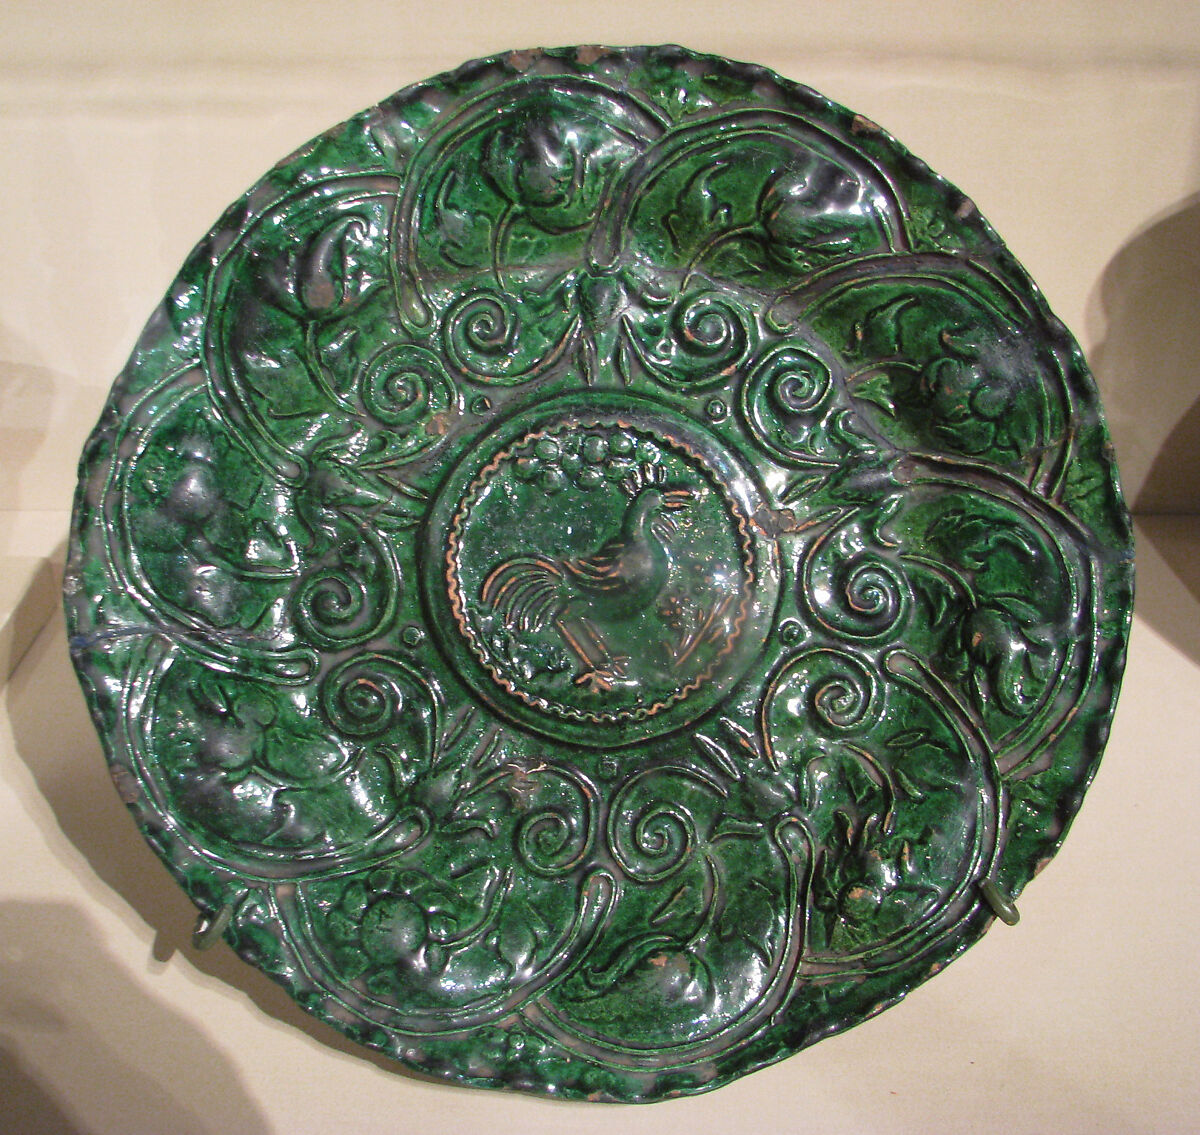 Plate, Lead-glazed earthenware, probably Spanish, Andalusia or Portuguese 